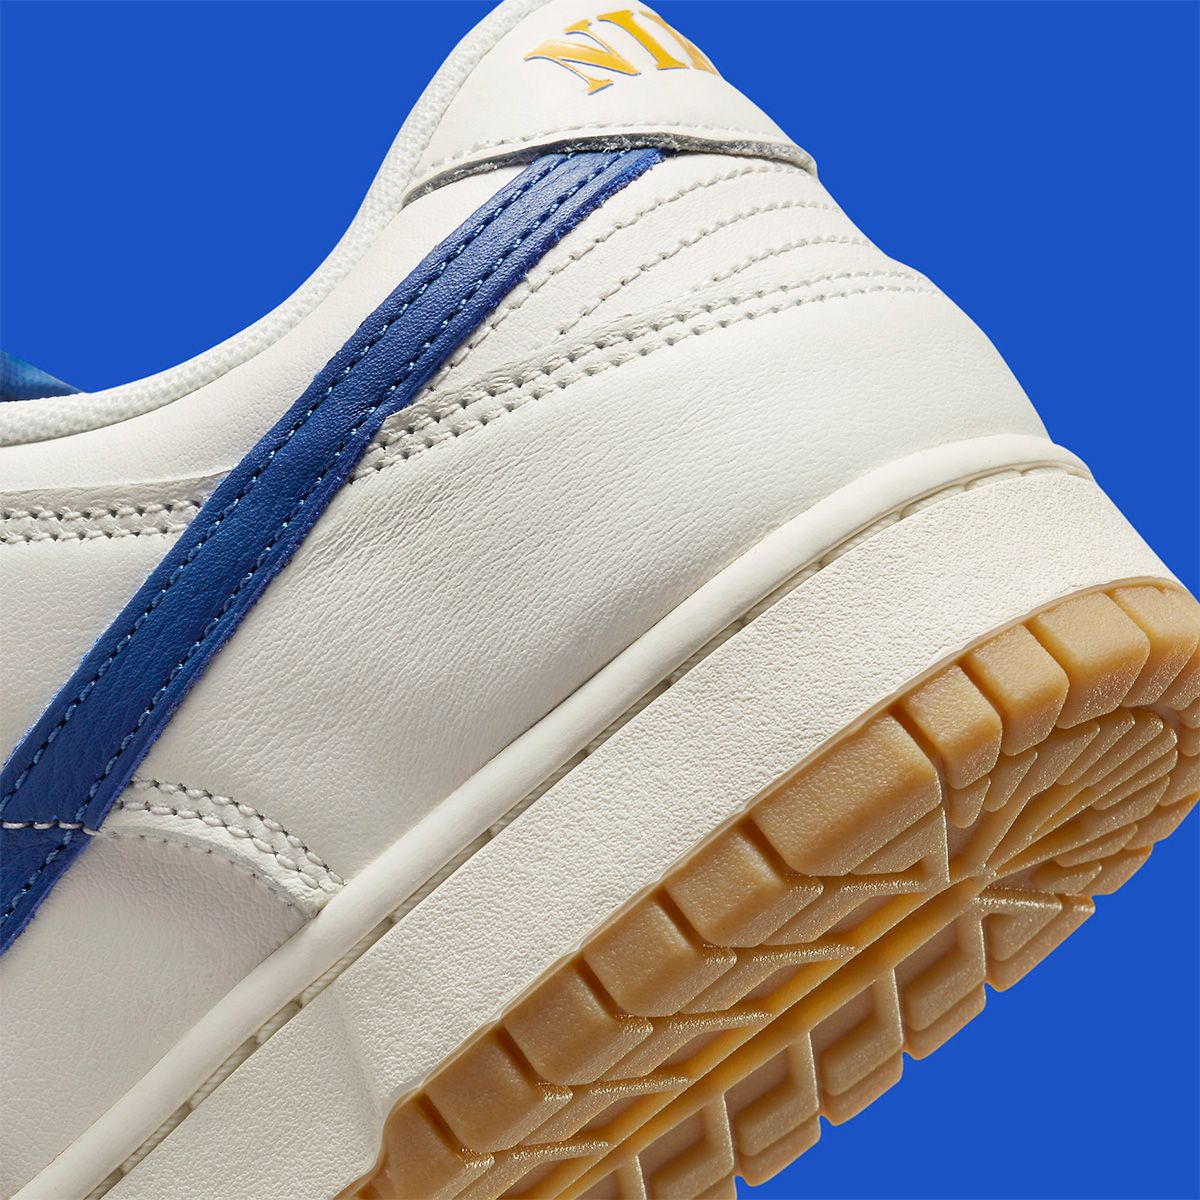 Nike Dress This New Dunk Low in White, Royal and Gum | House of Heat°